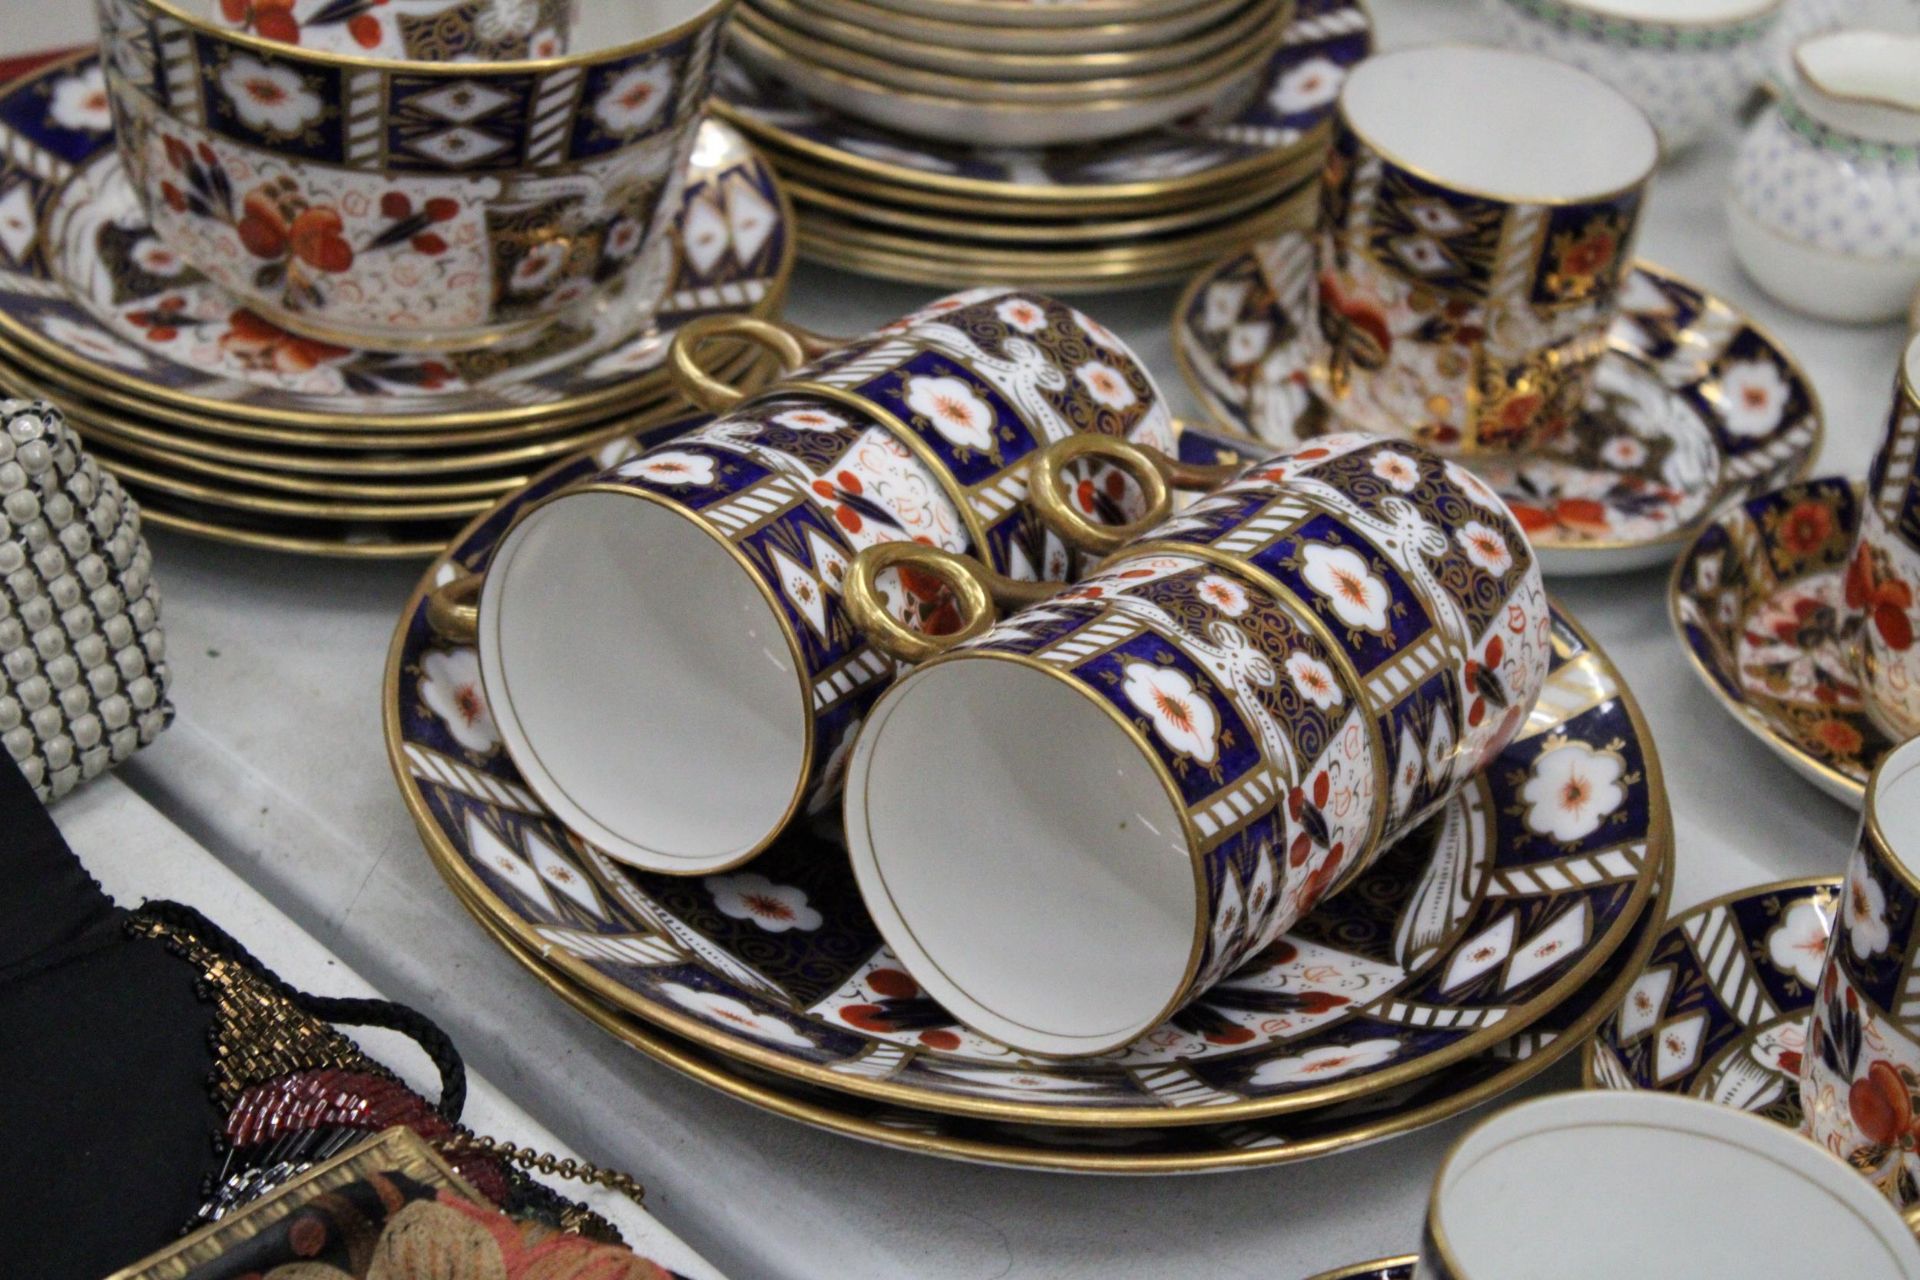 A LARGE QUANTITY OF VINTAGE 'IMARI' PATTERNED TEAWARE TO INCLUDE A SUGAR BOWL, CREAM JUG, CUPS, - Image 5 of 6